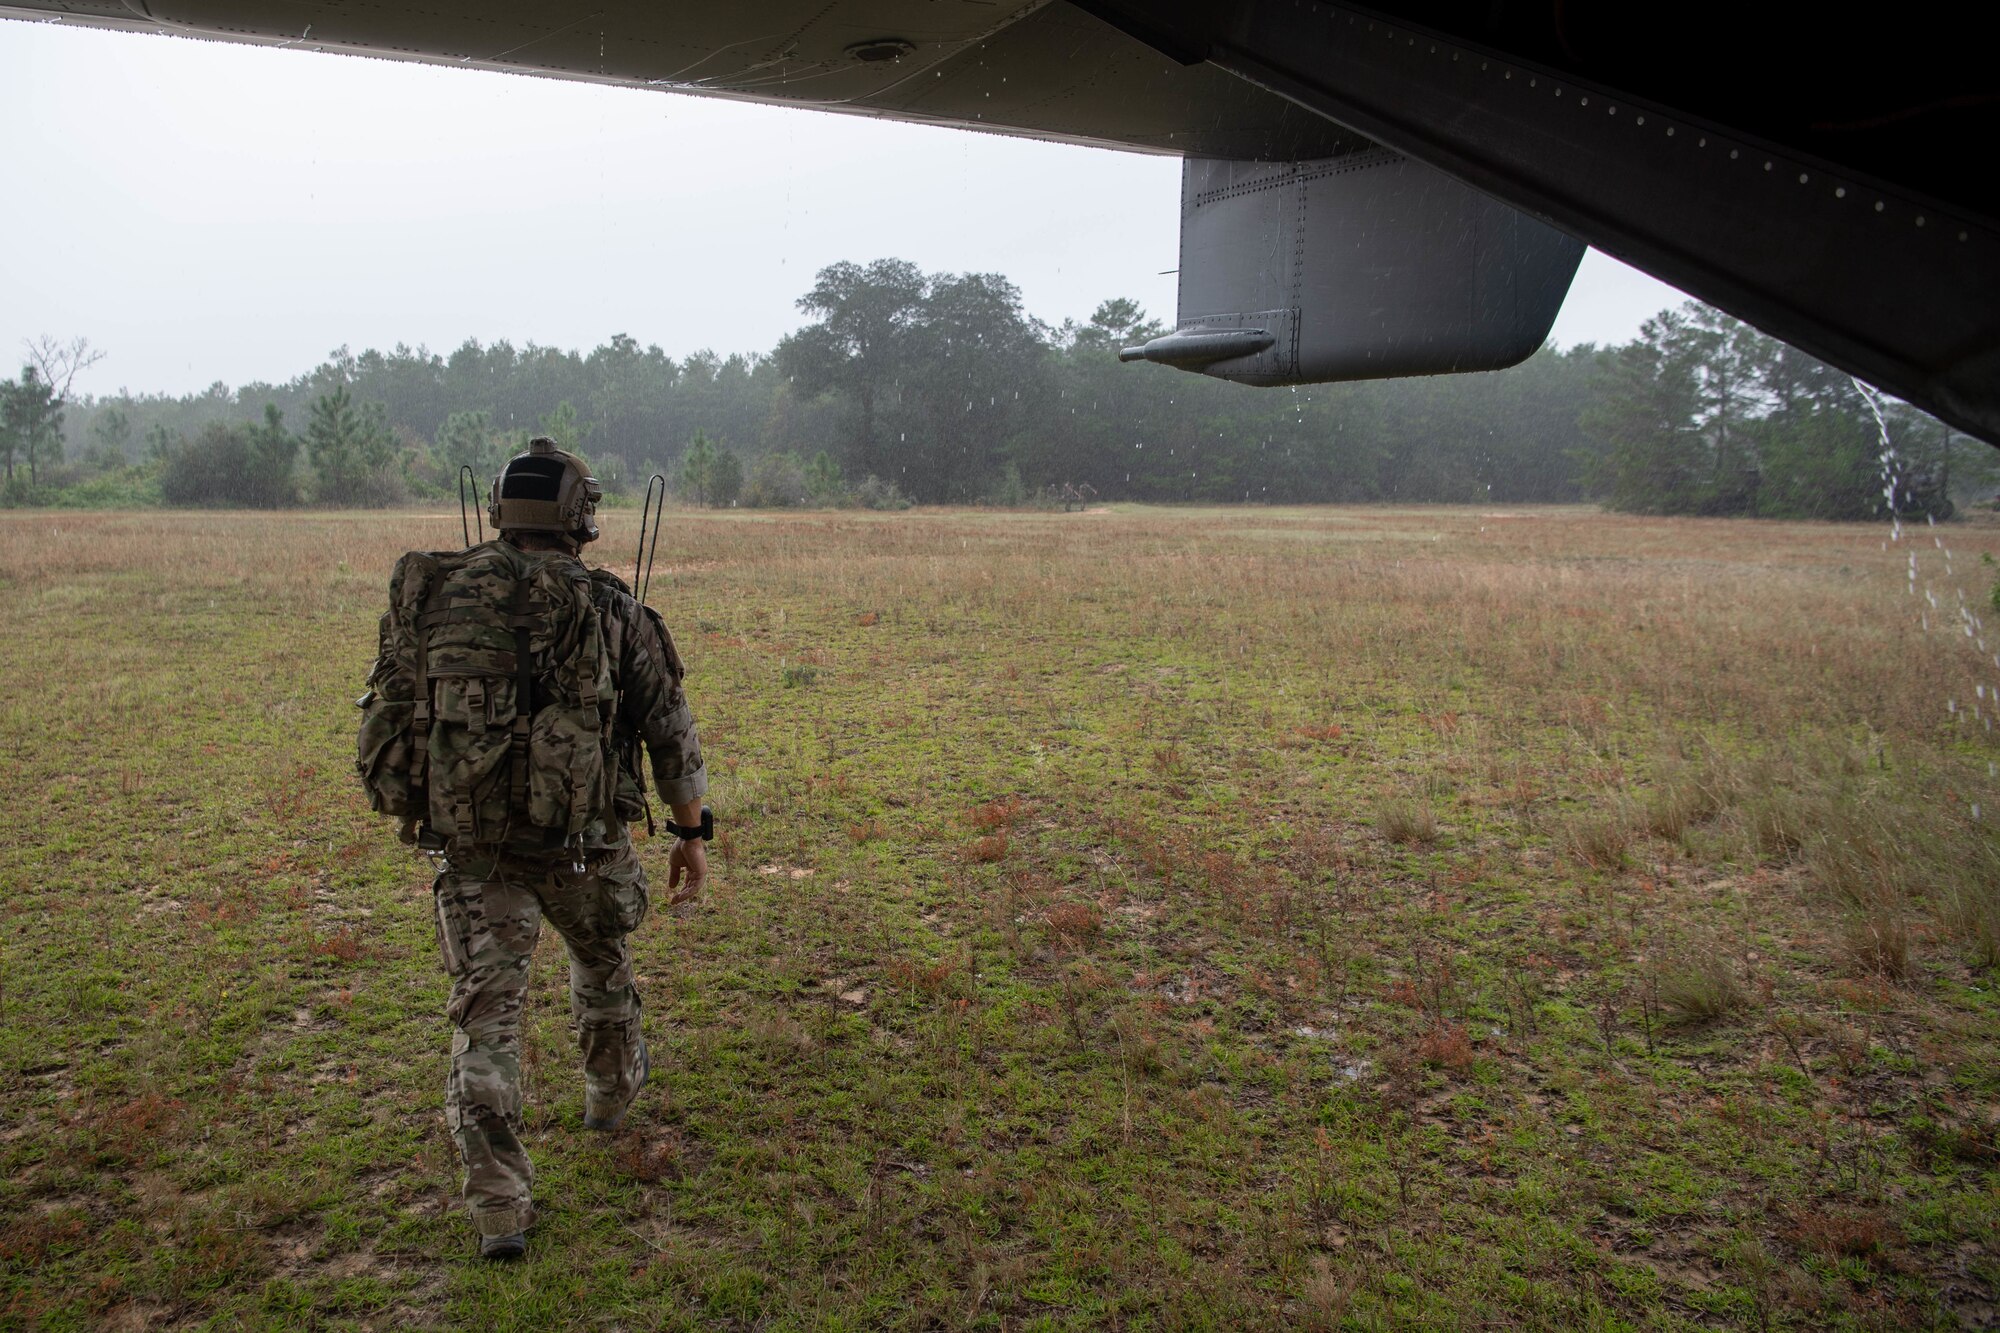 A single Special Tactics Operator with heavy pack walks away from us under the tail of a helicopter towards a simulated disaster site in the tree line in the distance.